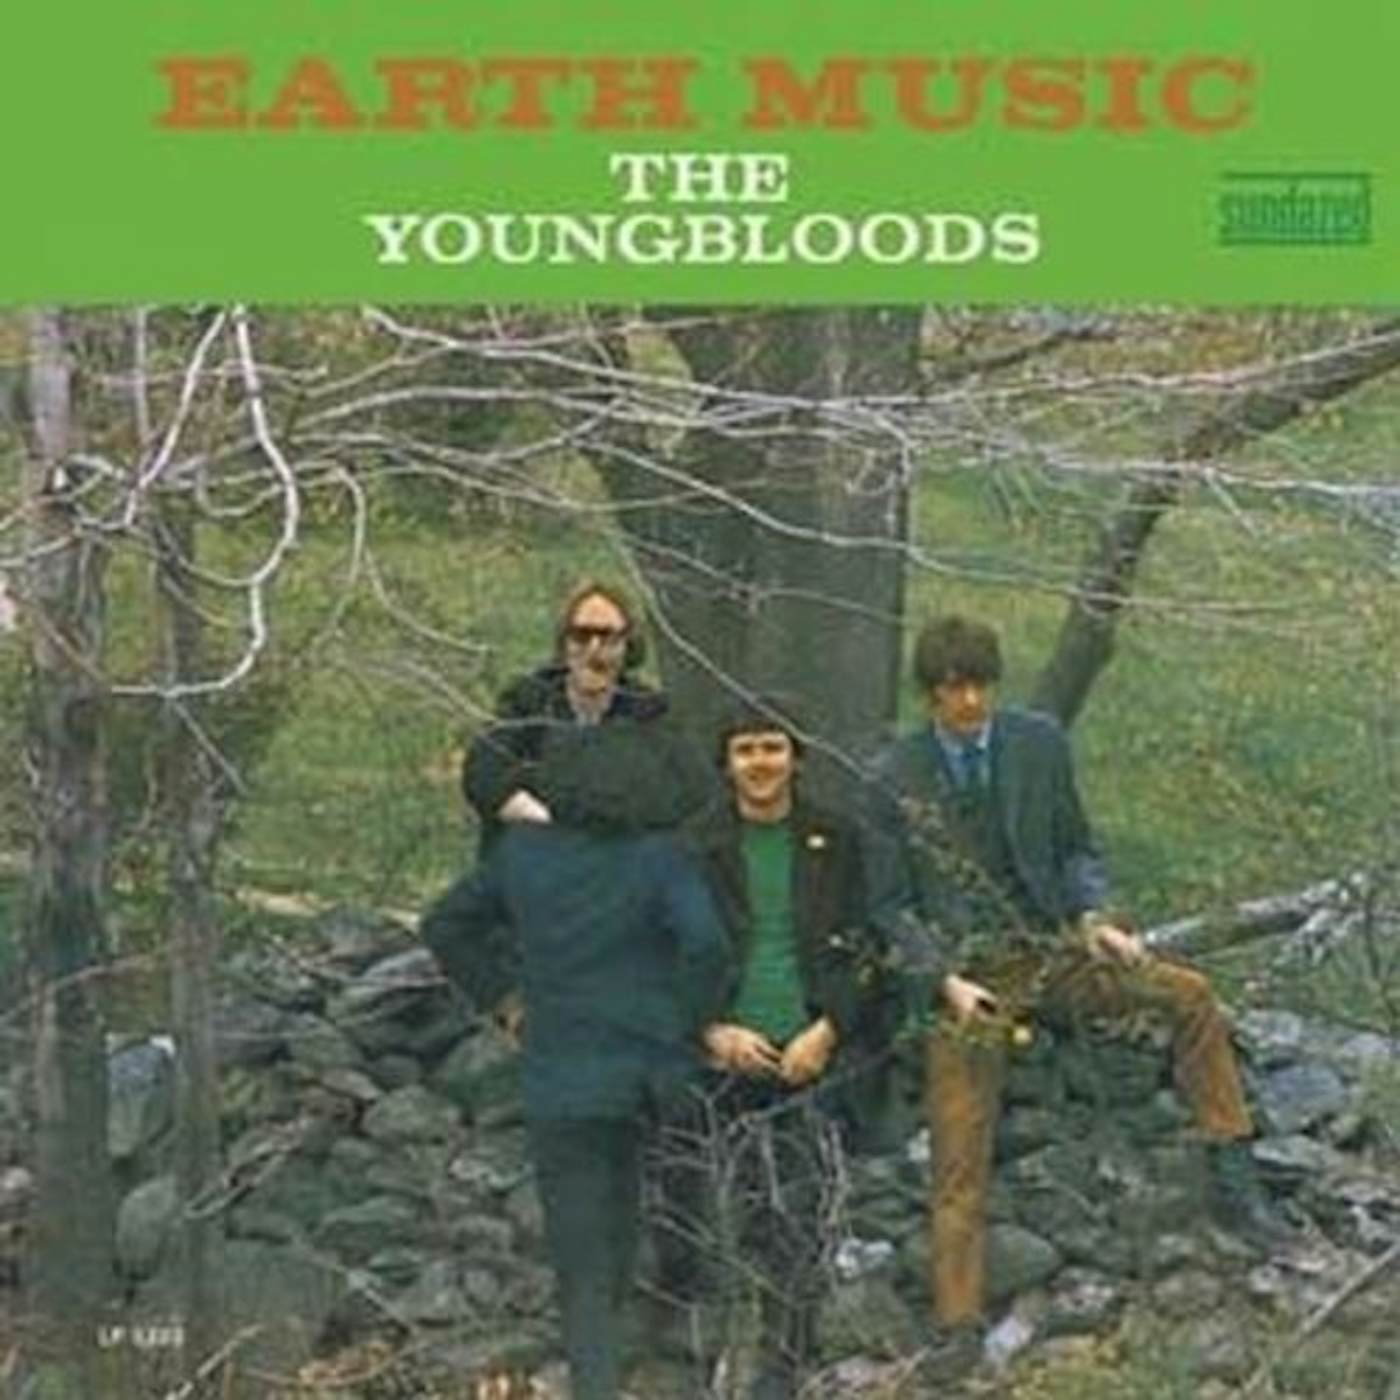 The Youngbloods Earth Music Vinyl Record